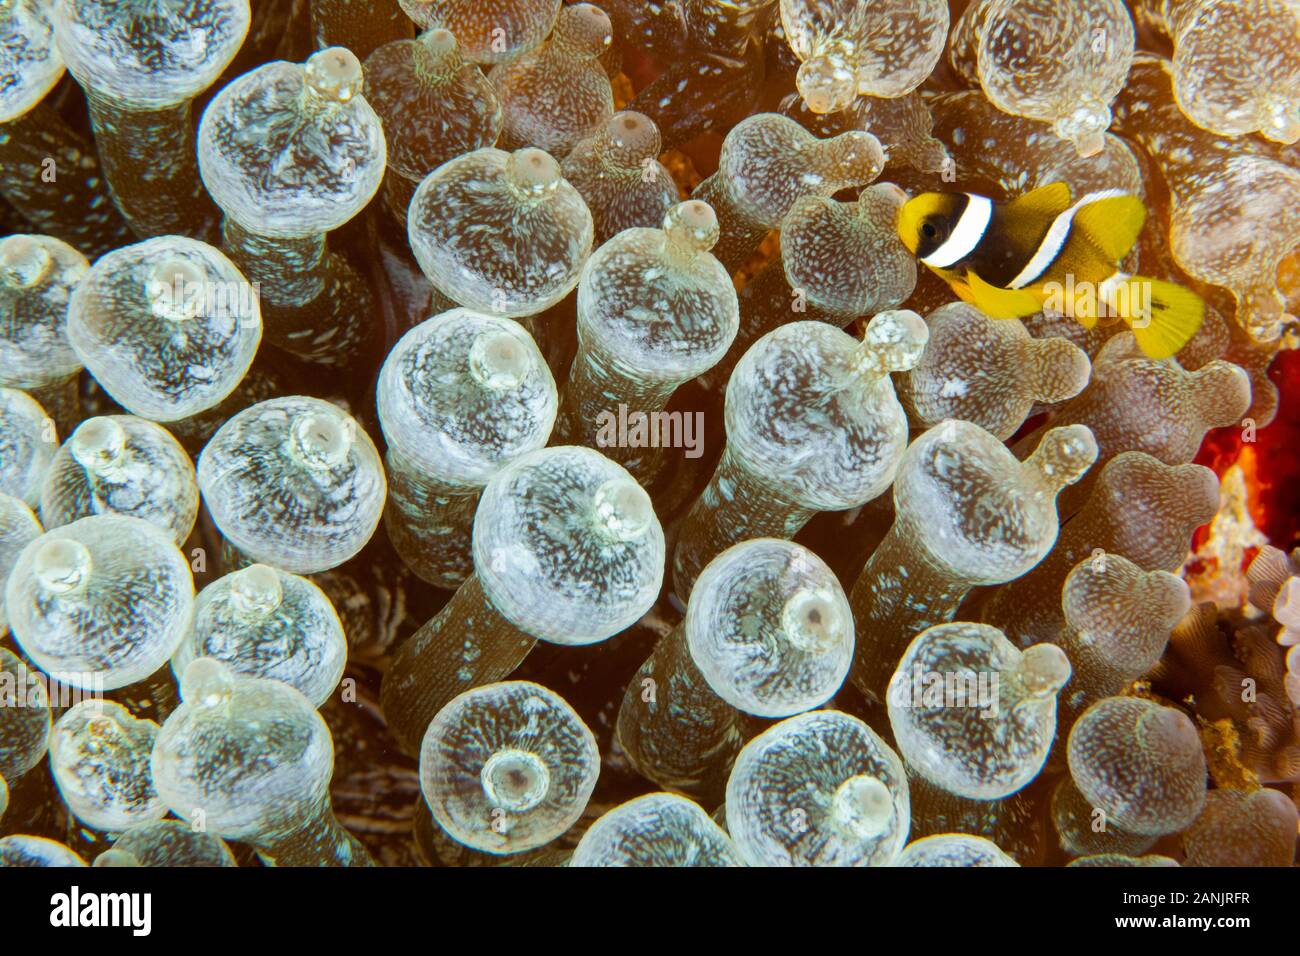 young sebae clownfish, or yellow-tail anemonefish, Amphiprion sebae, among bulb tentacles of bubble-tip sea anemone, Entacmaea quadricolor, Maldives, Stock Photo